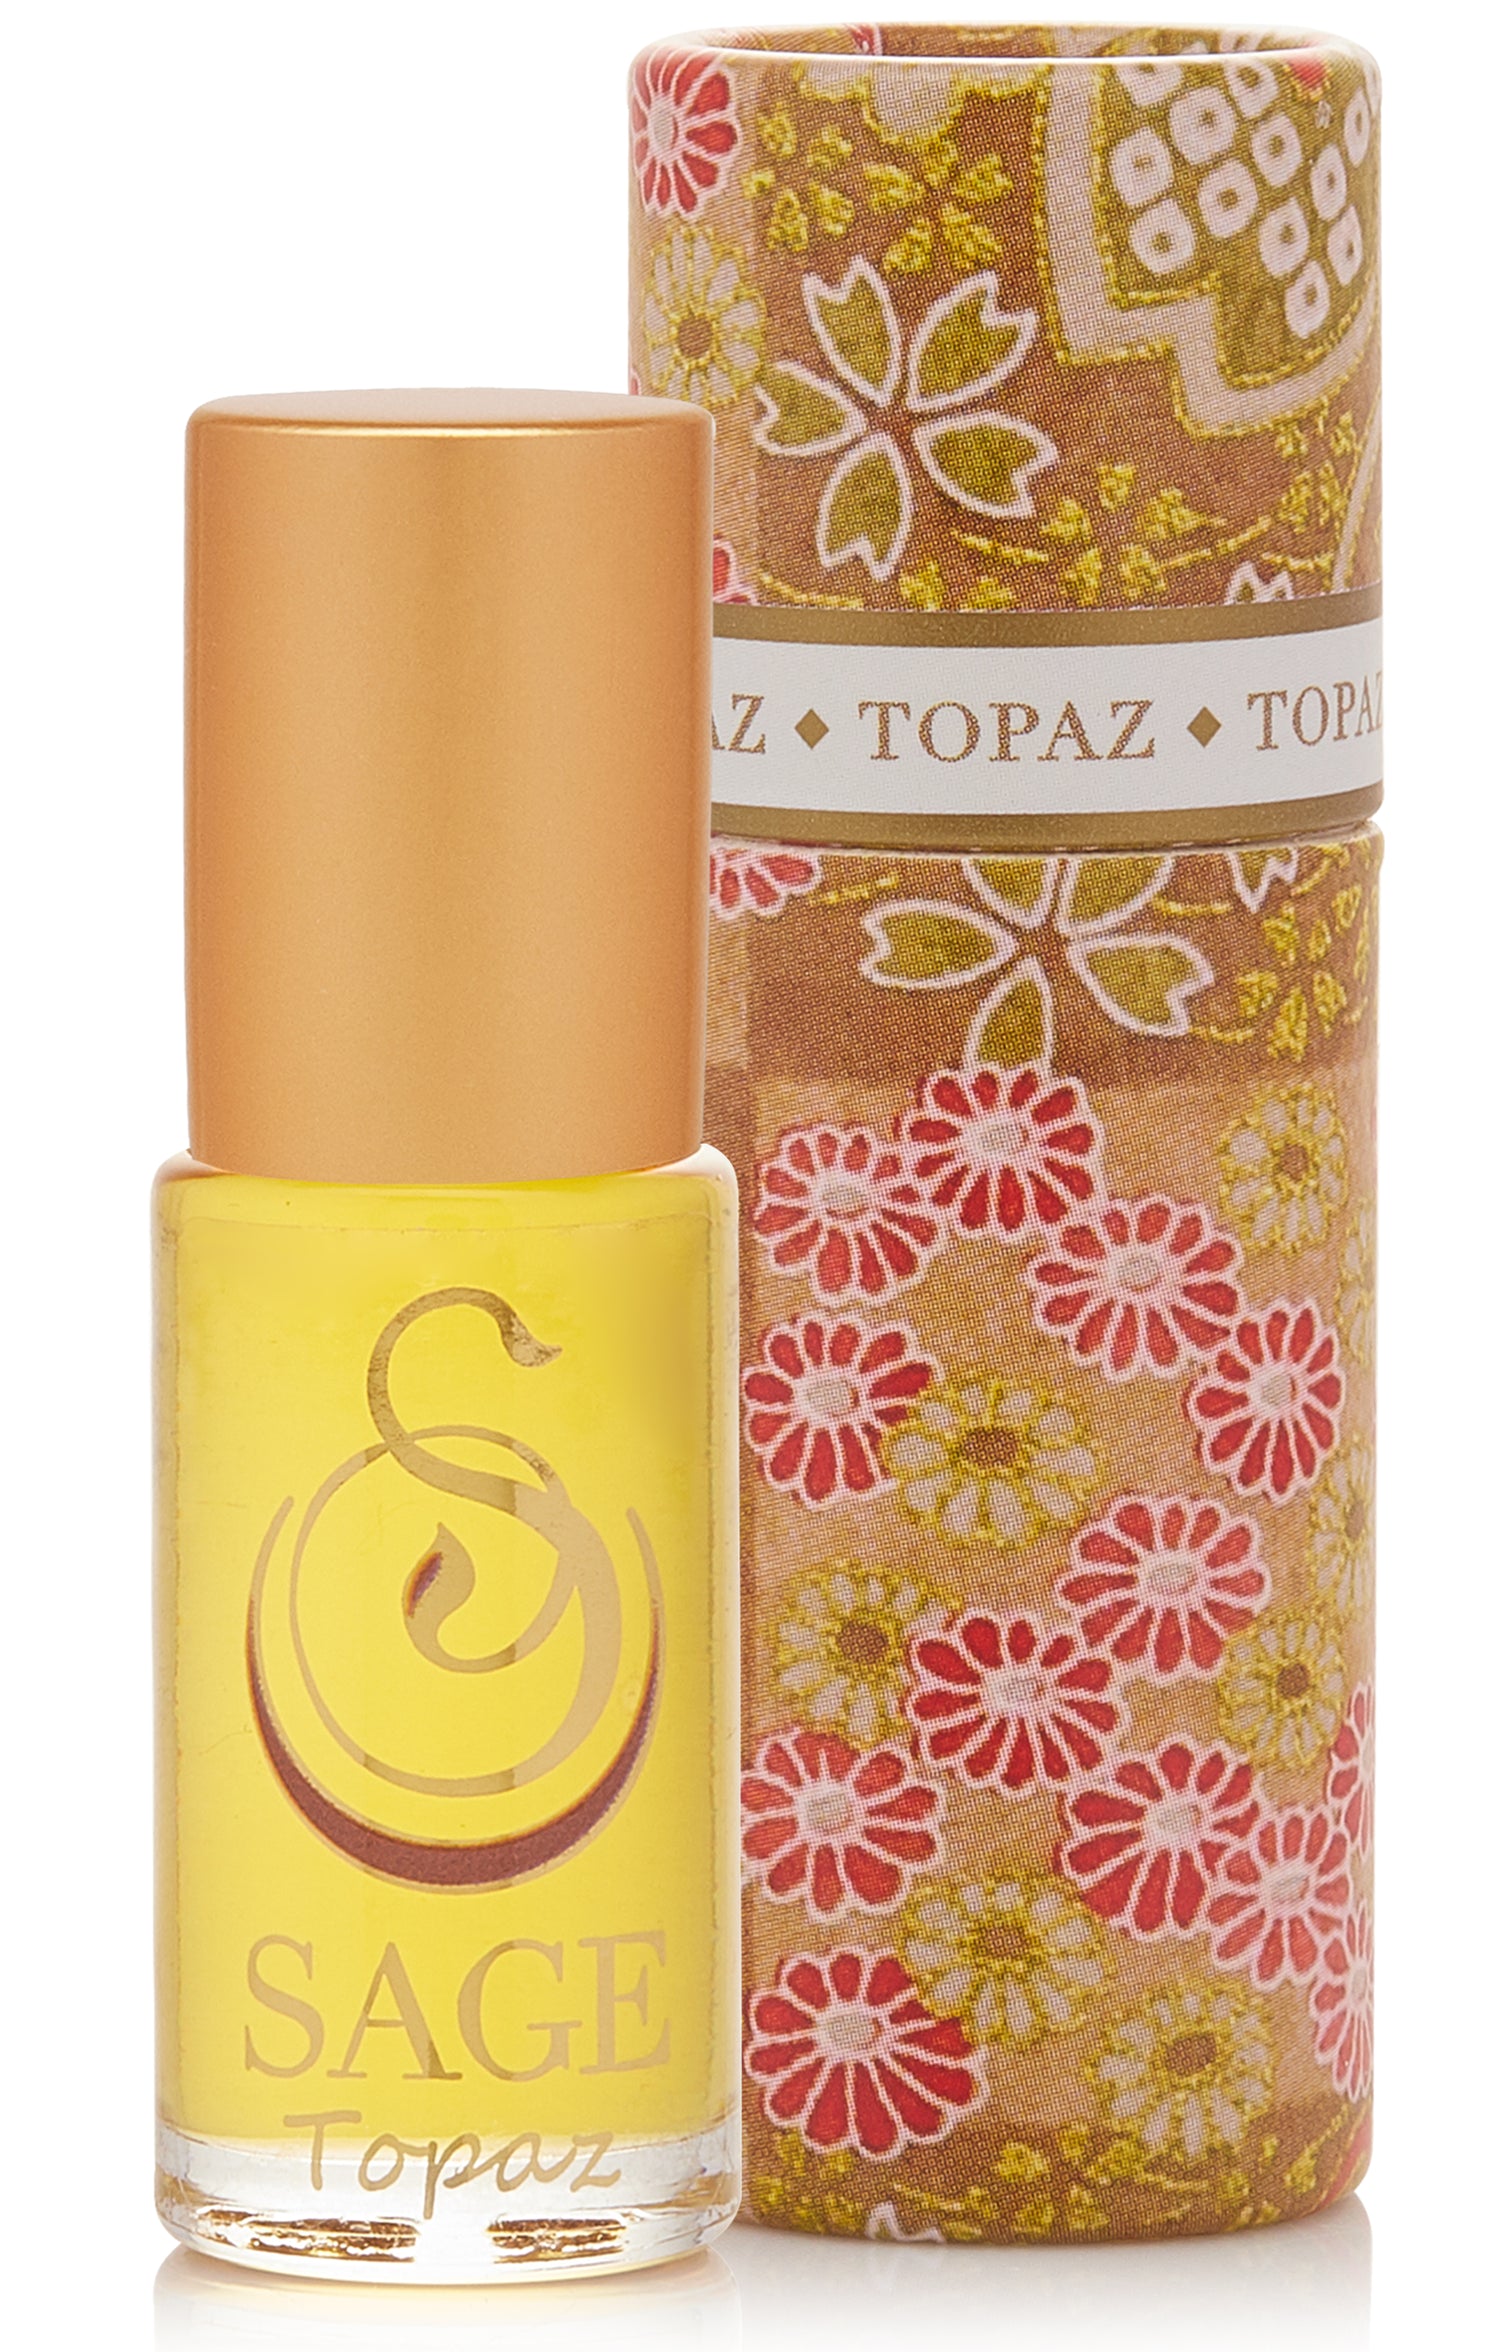 Topaz 1/8 oz Perfume Oil Concentrate Roll-On by Sage